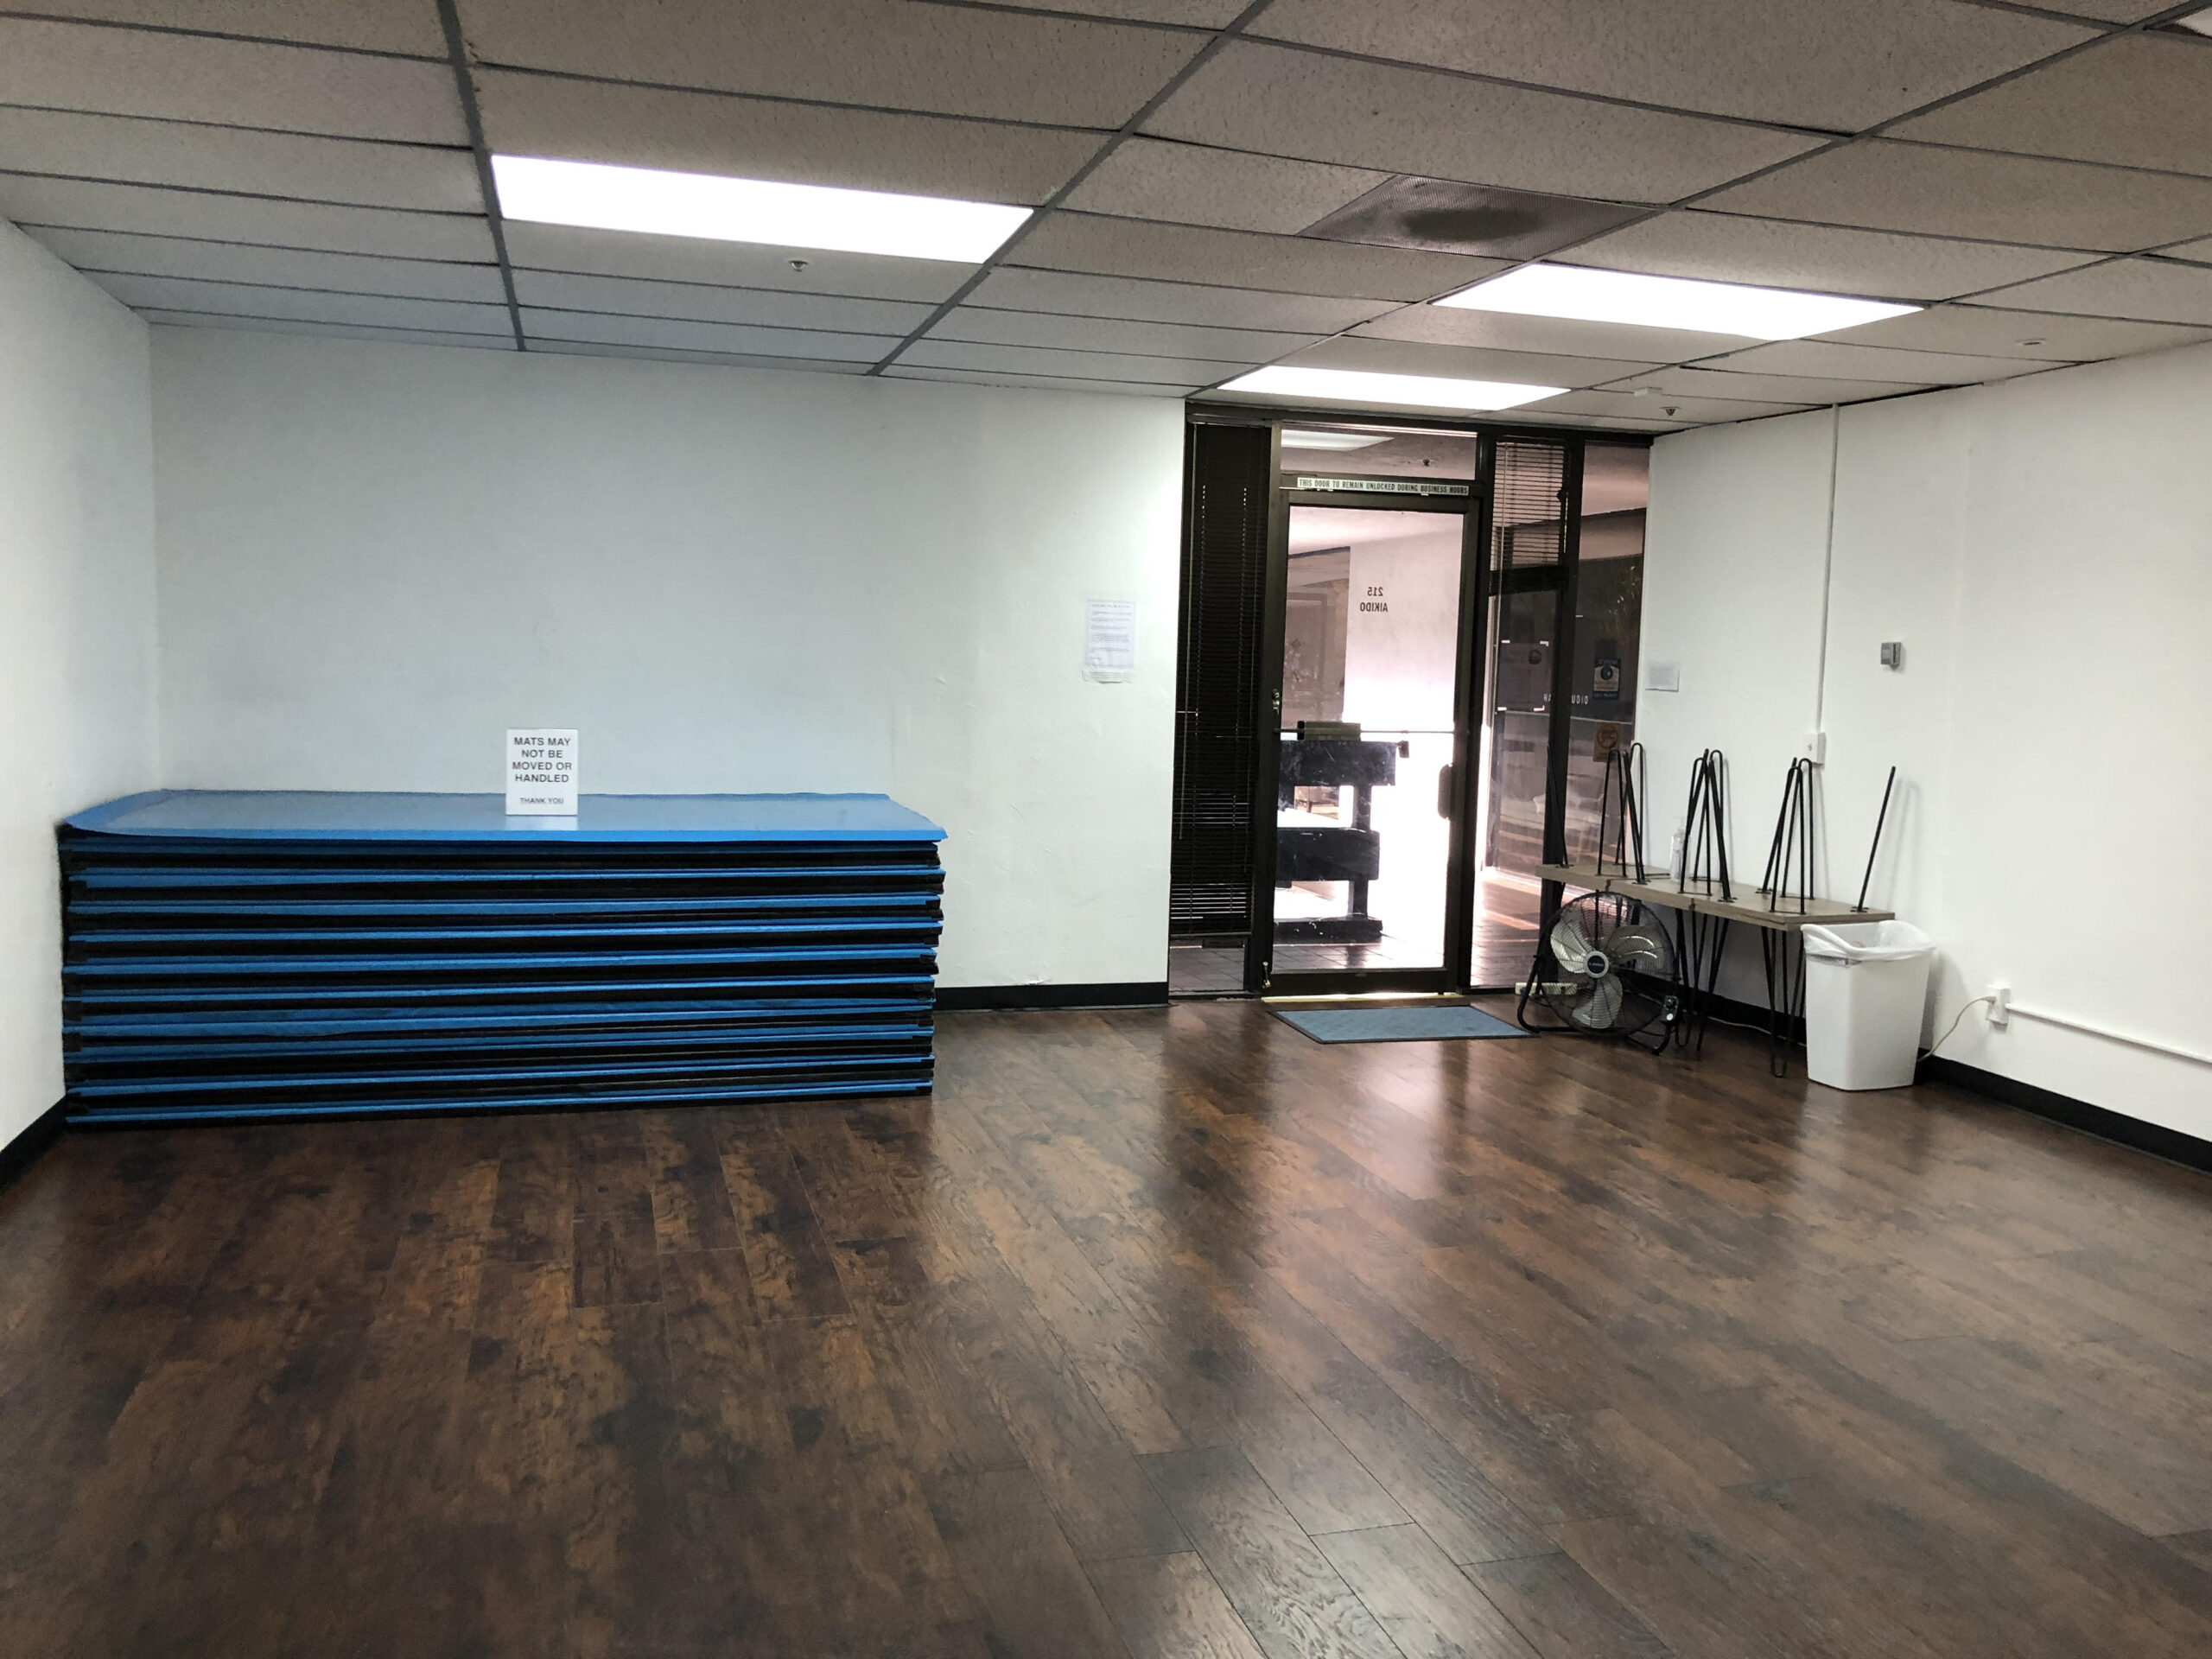 Photo of a clean, tidy dojo, with mats neatly stacked in one corner.